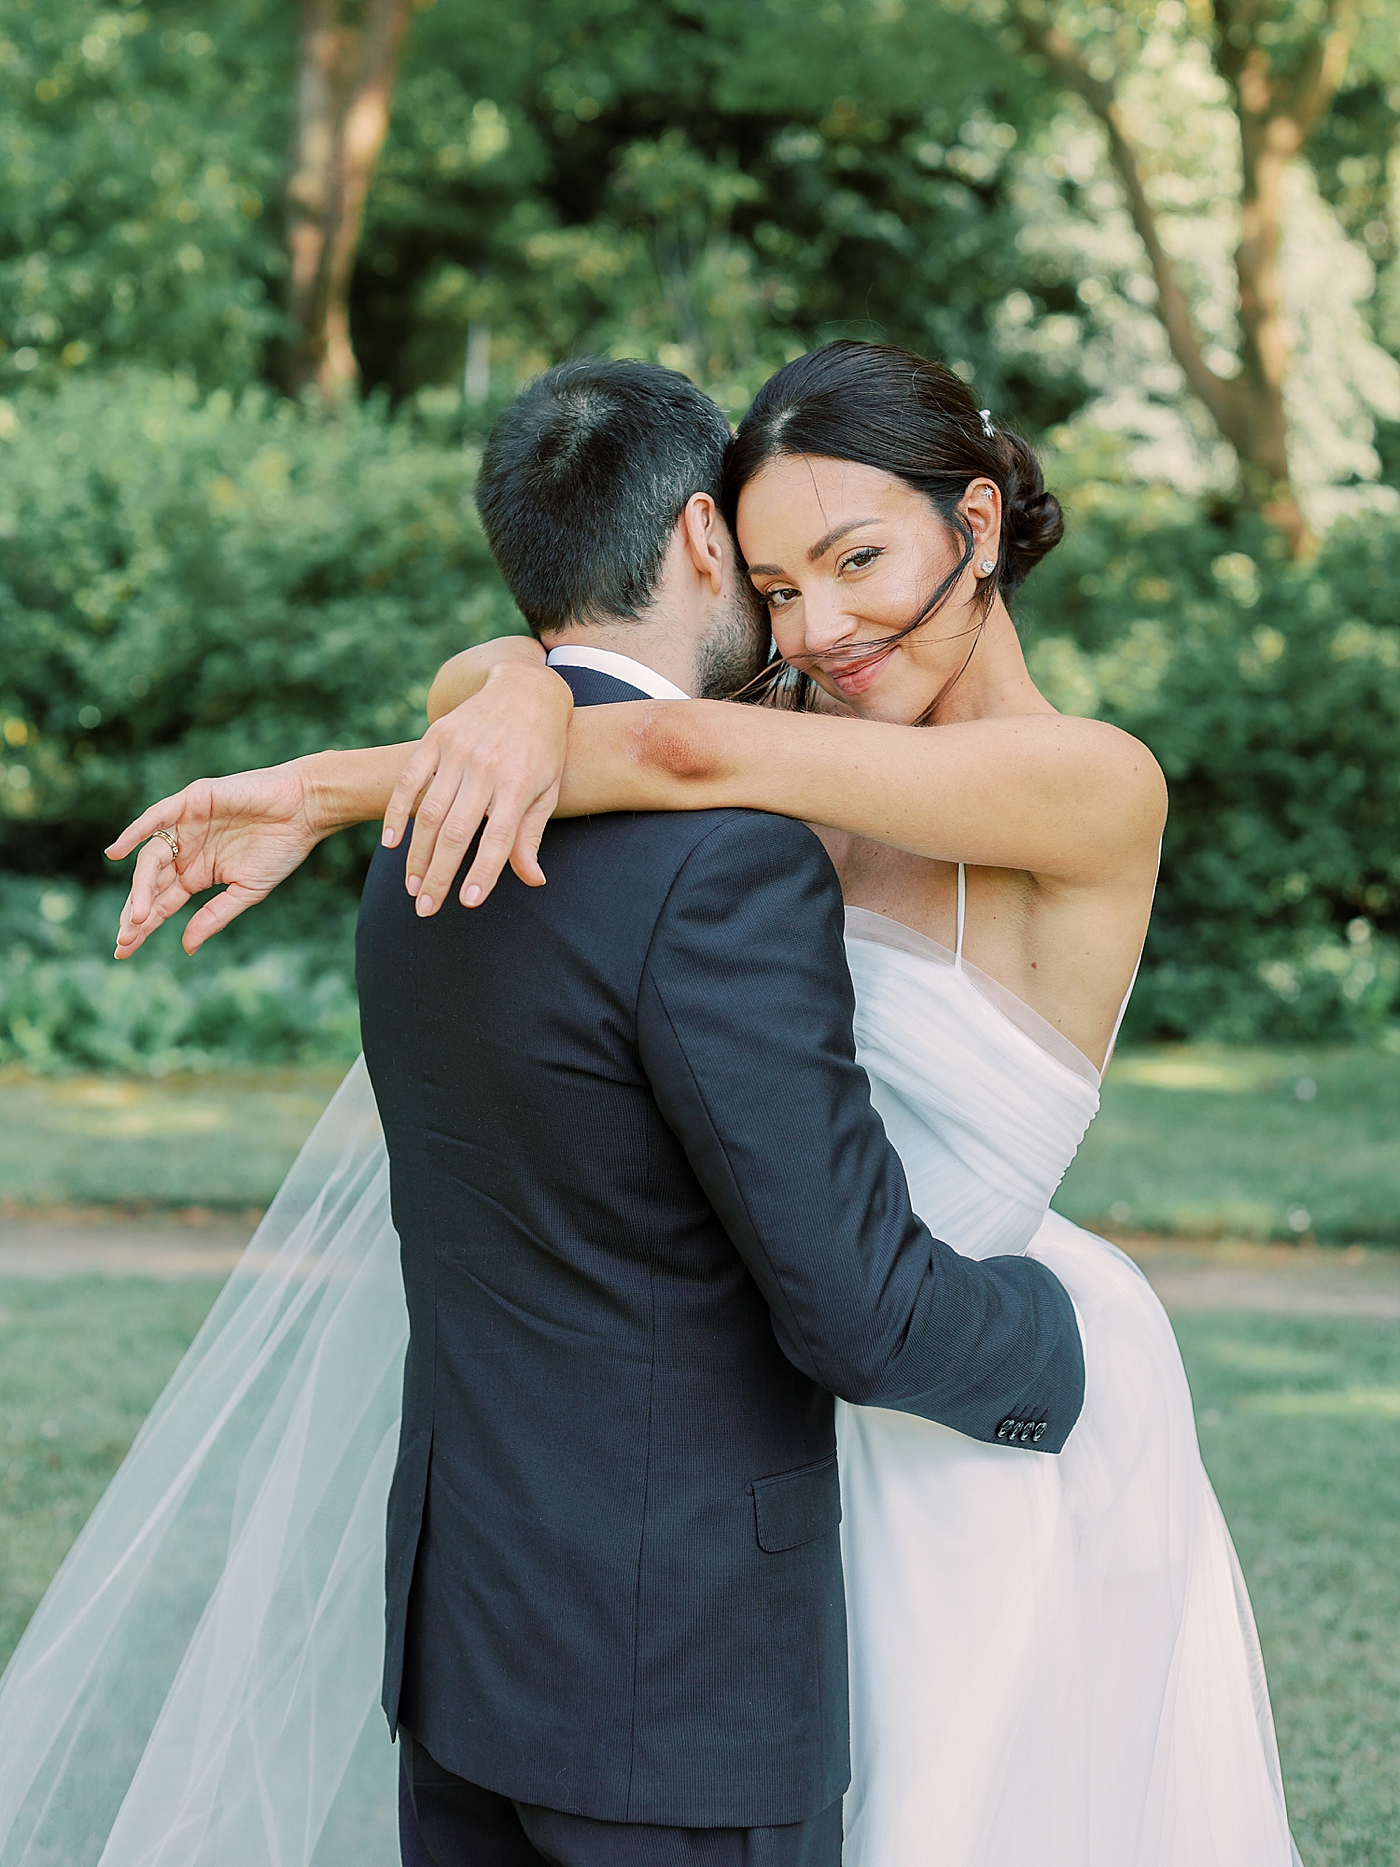 Bride with her arms draped over groom | Image by Diane Sotero Photography